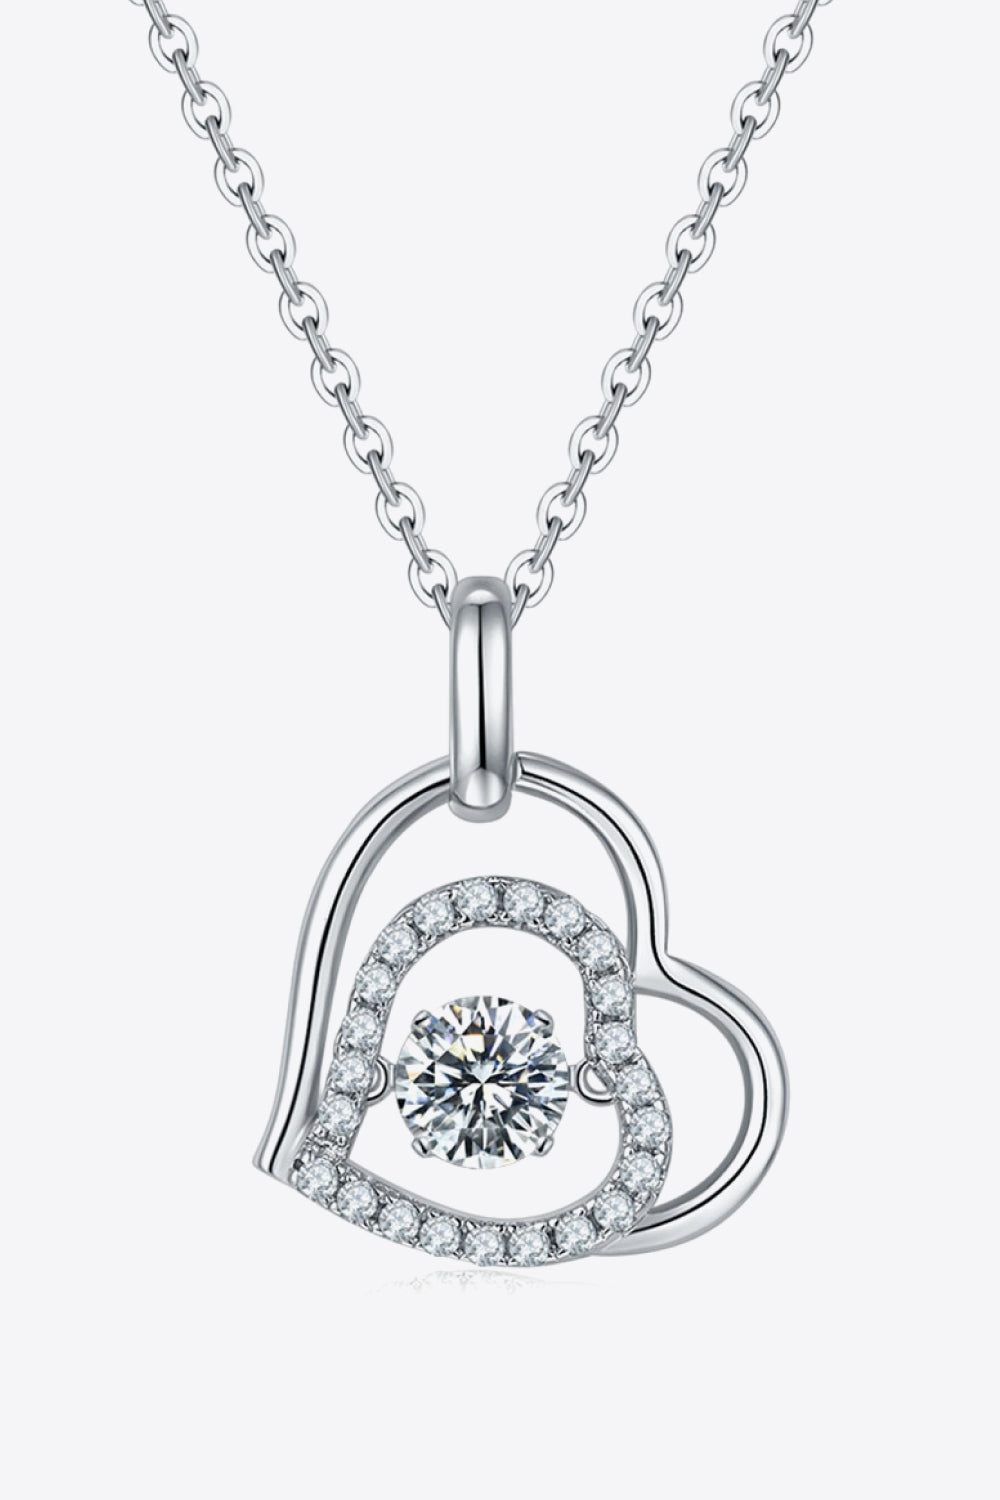 Moissanite Heart Pendant Necklace - Necklaces - FITGGINS